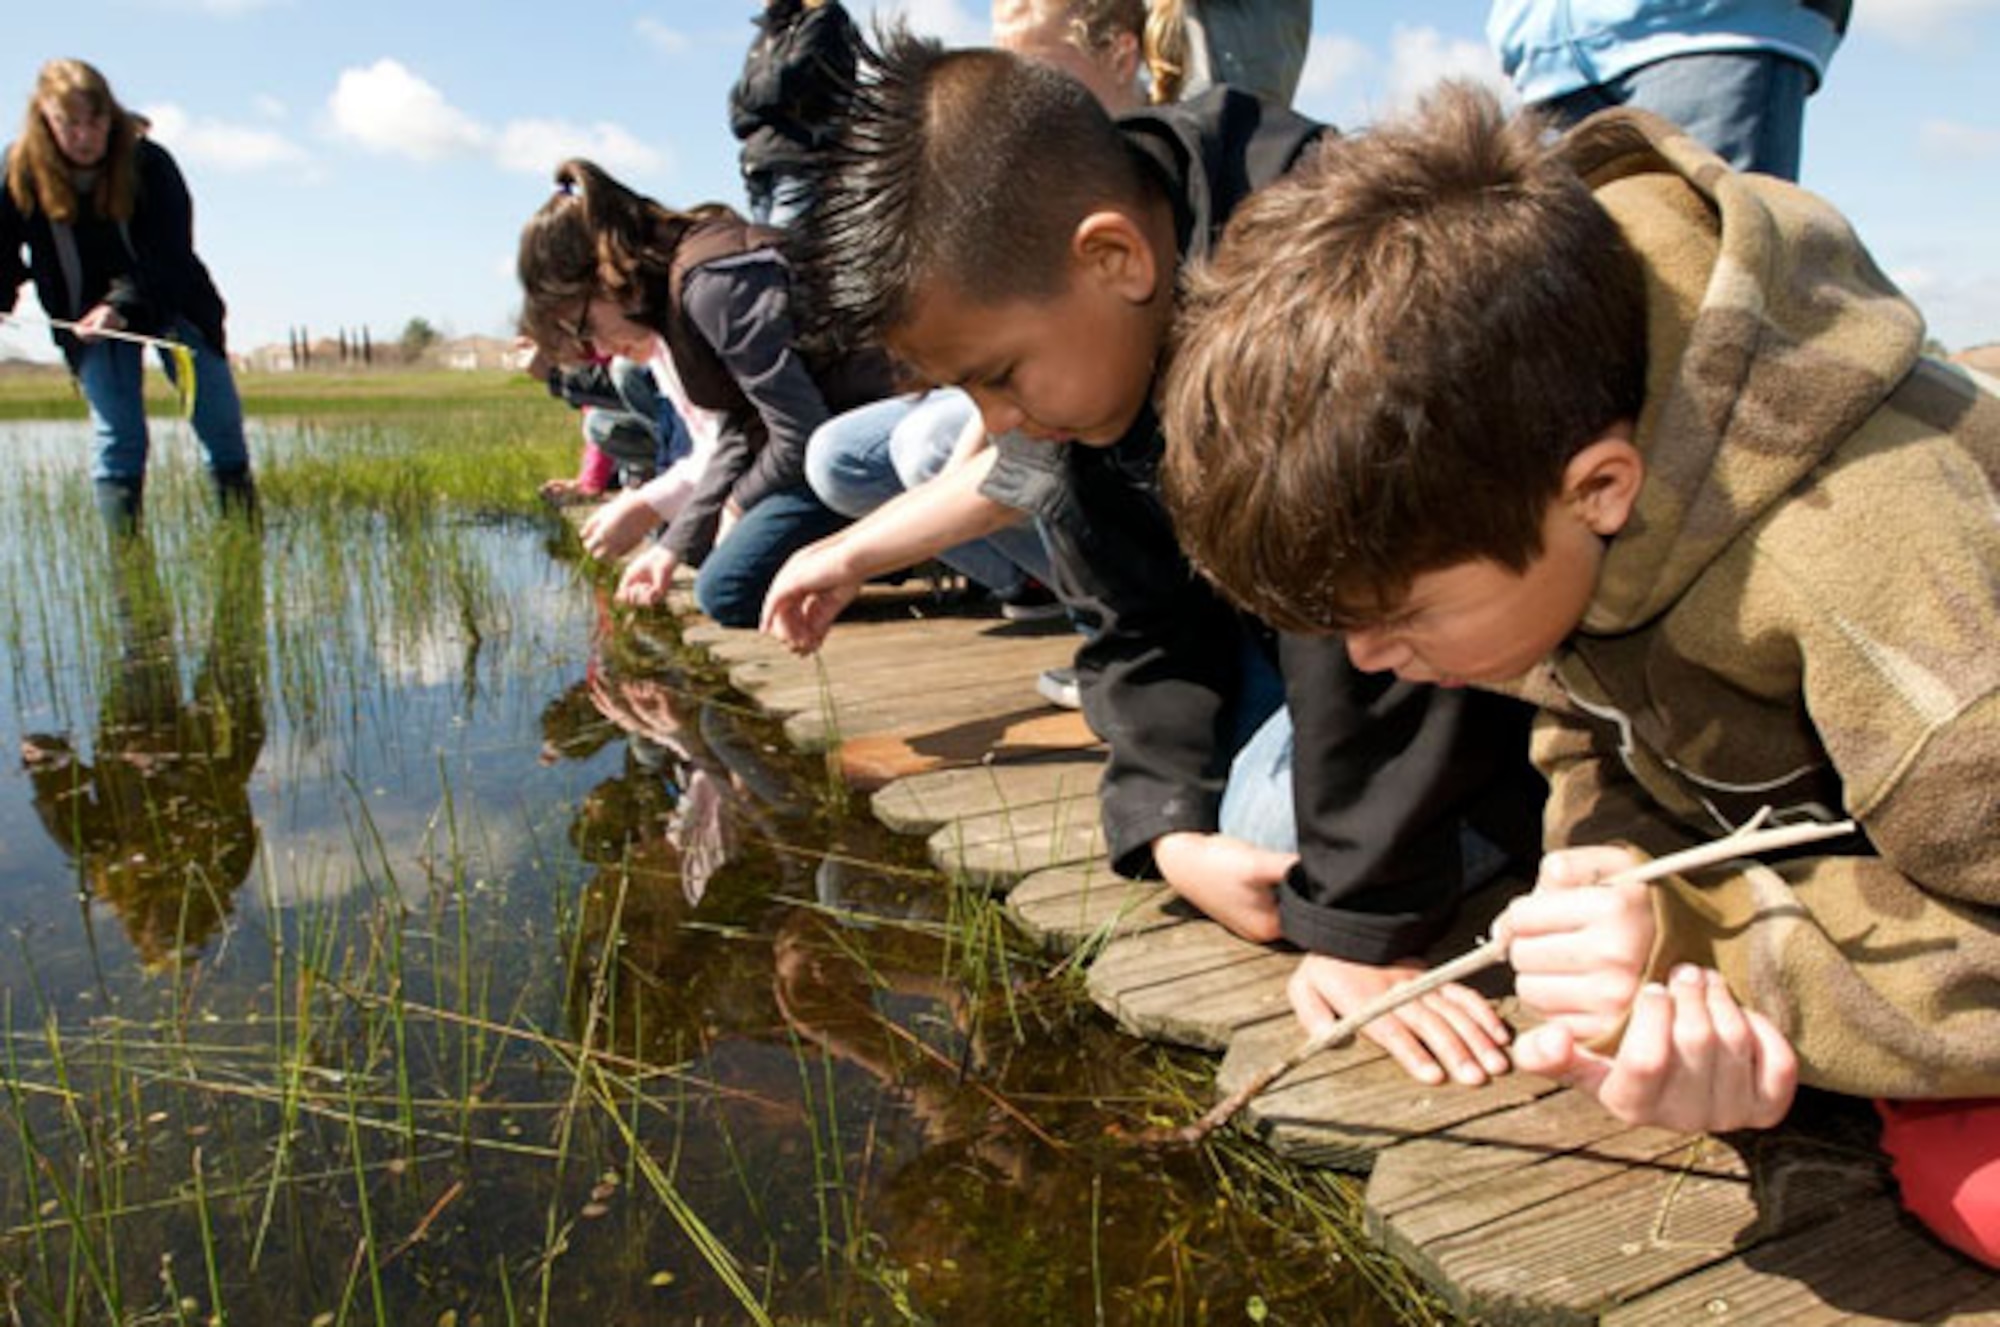 Splash offers local school children a chance to step into the wild, fostering environmental awareness using Mather's rare wetland ecosystem, unique to California.